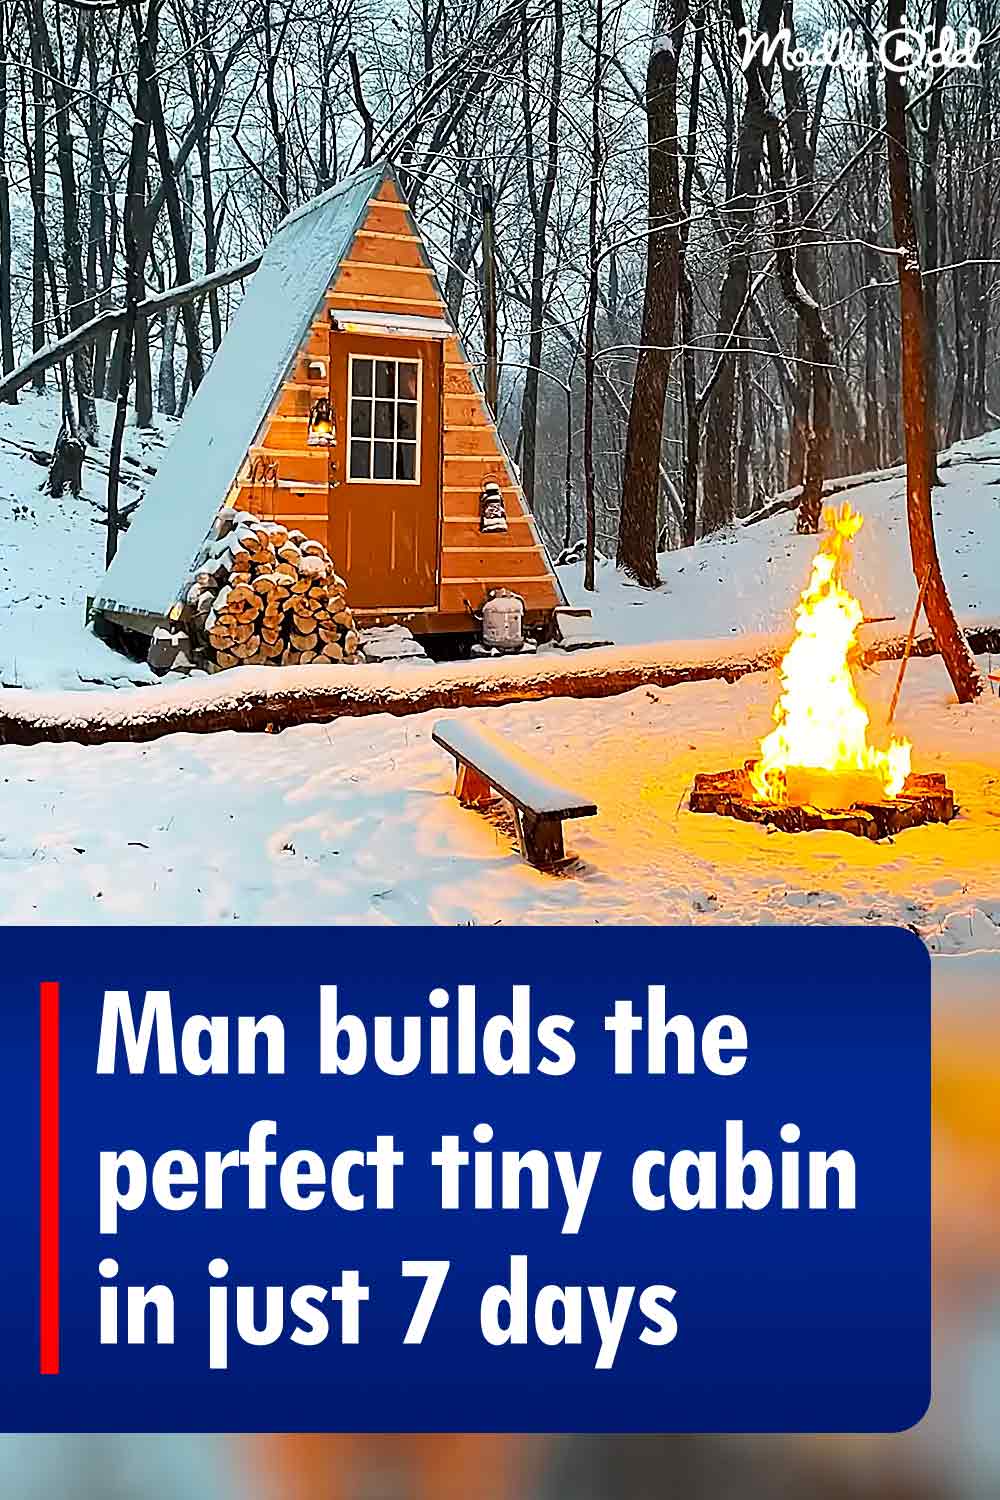 Man builds the perfect tiny cabin in just 7 days